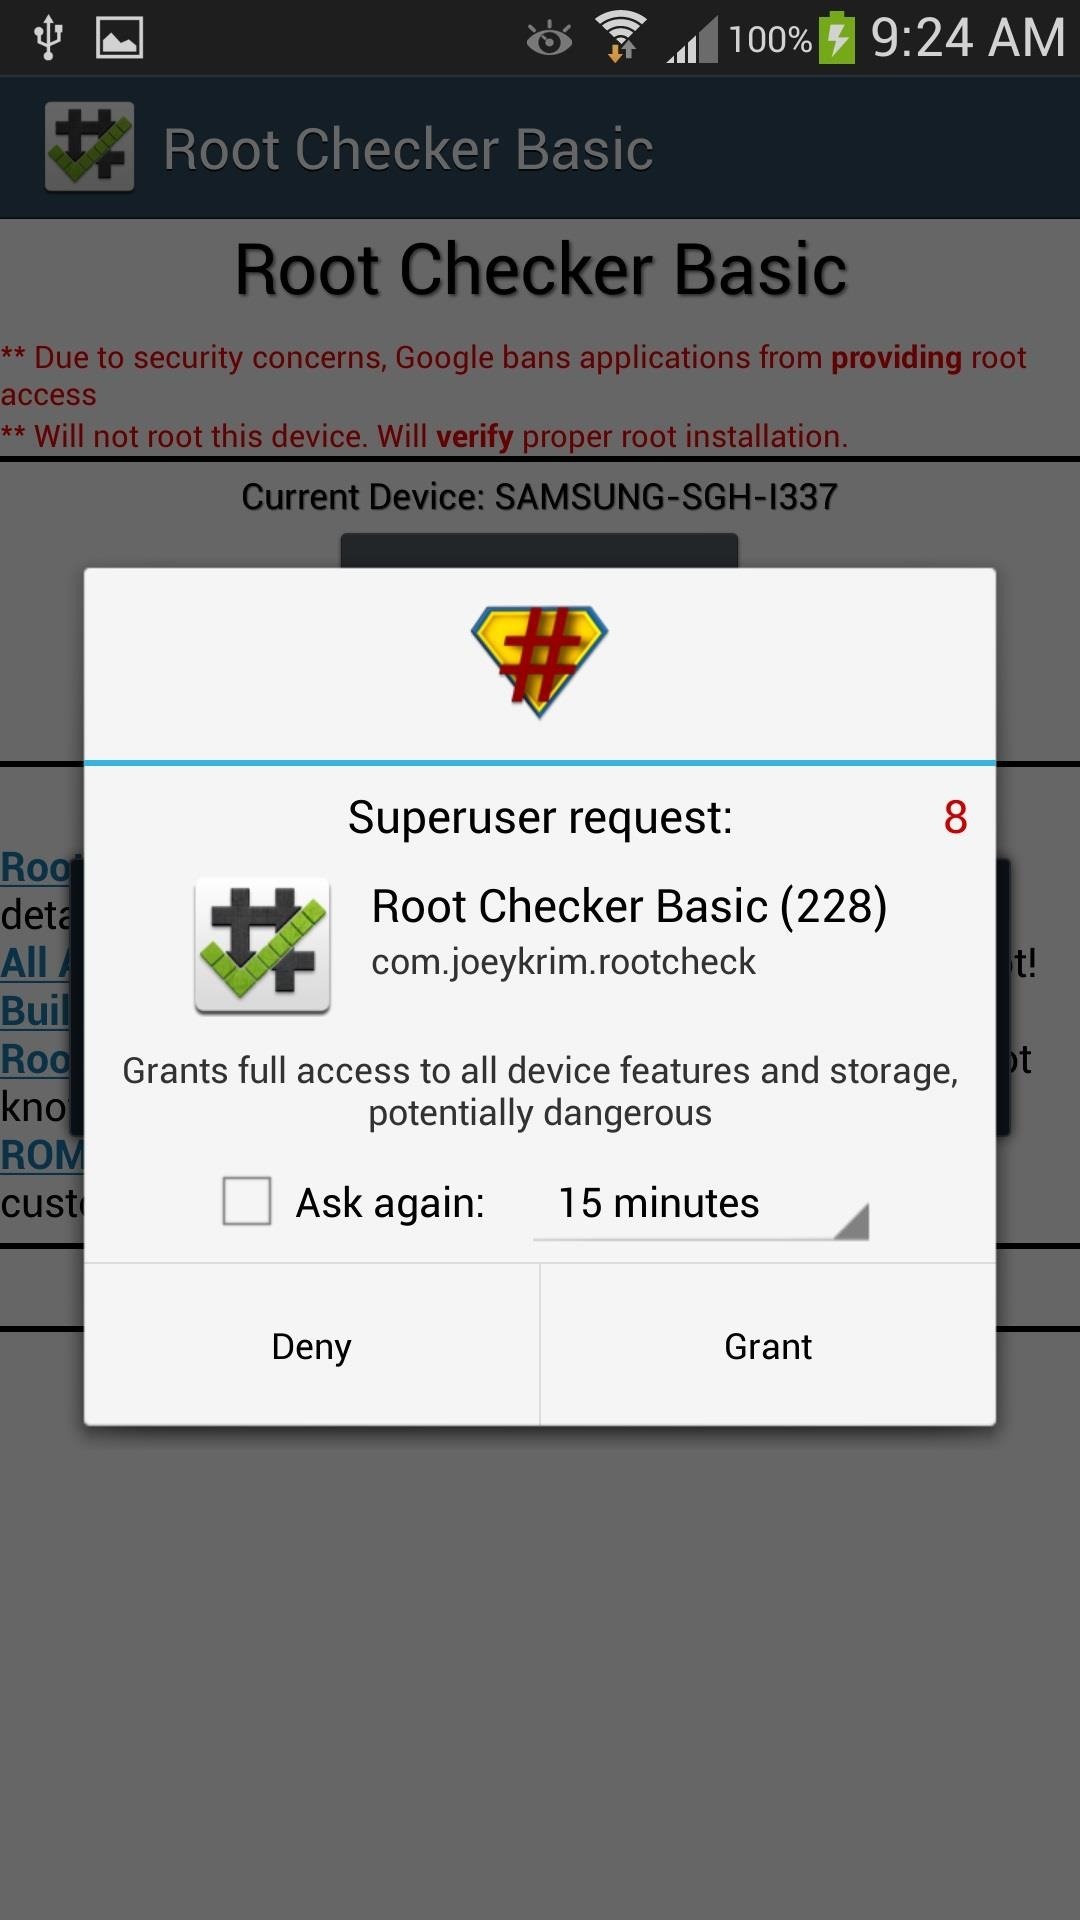 How to Root Your Samsung Galaxy S4 (Or Almost Any Other Android Phone) In One Easy Click